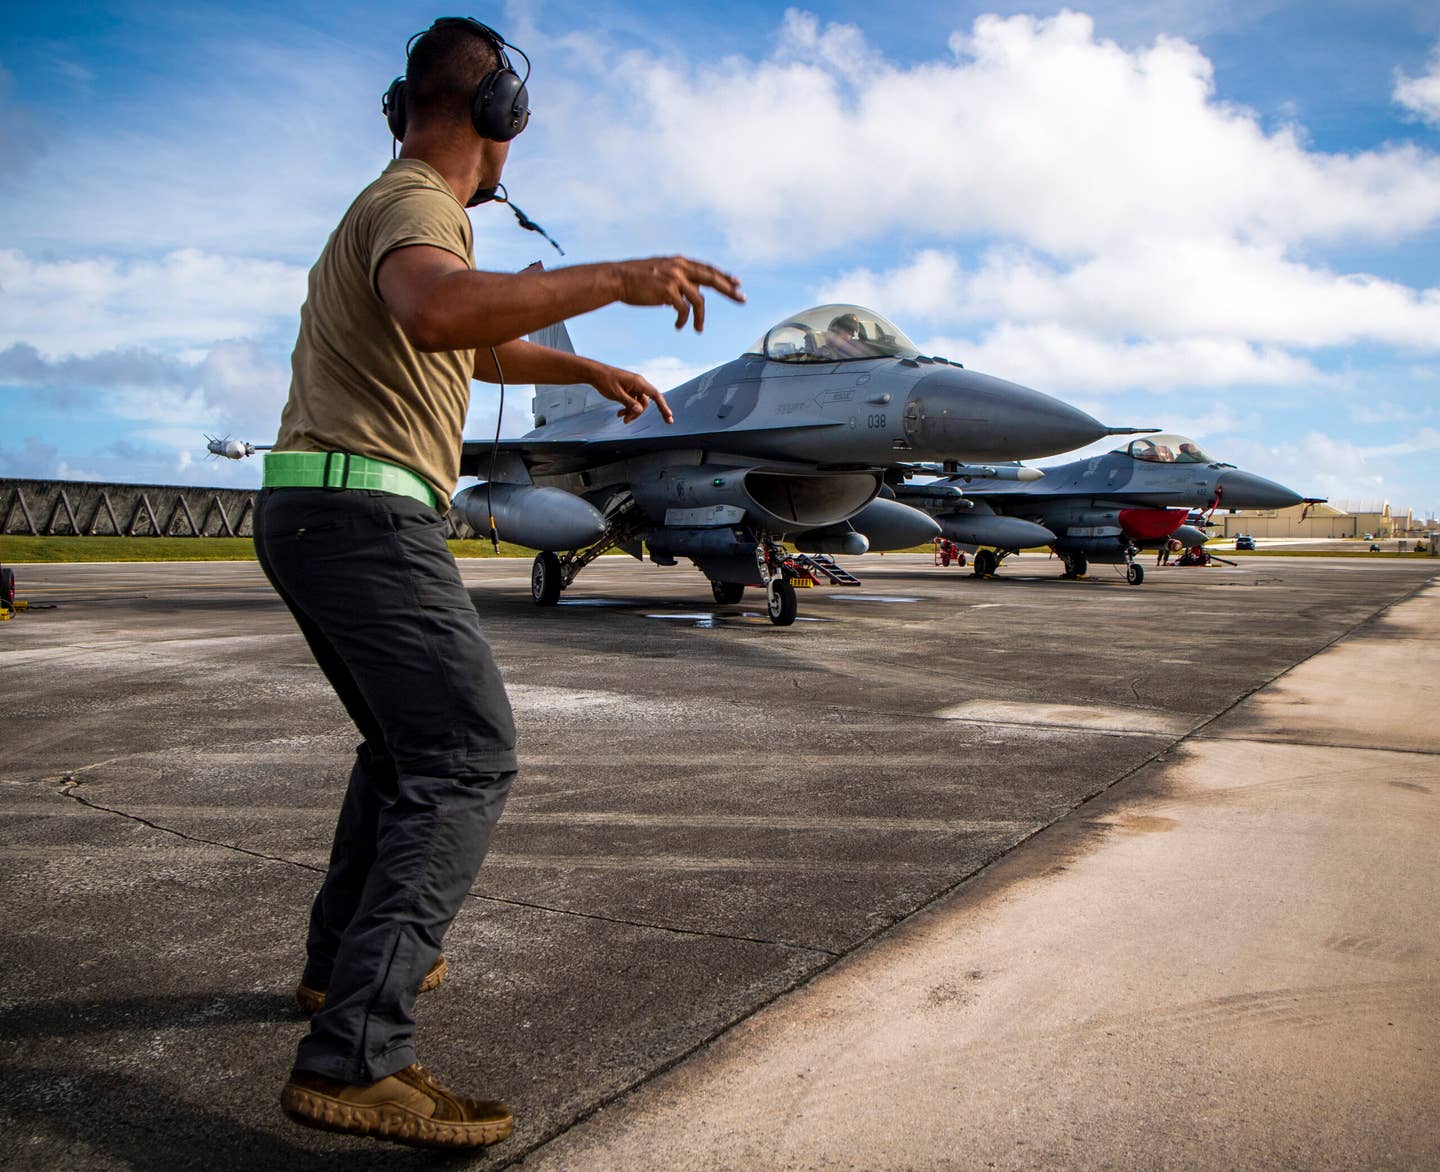 A U.S. Air Force crew chief assigned to the 13th Aircraft Maintenance Squadron motions a U.S. Air Force F-16 Fighting Falcon assigned to the 13th Fighter Squadron to taxi during exercise Cope North 21 at Andersen Air Force Base, Guam, Feb. 17, 2021.  (U.S. Air Force photo by Senior Airman Duncan C. Bevan)